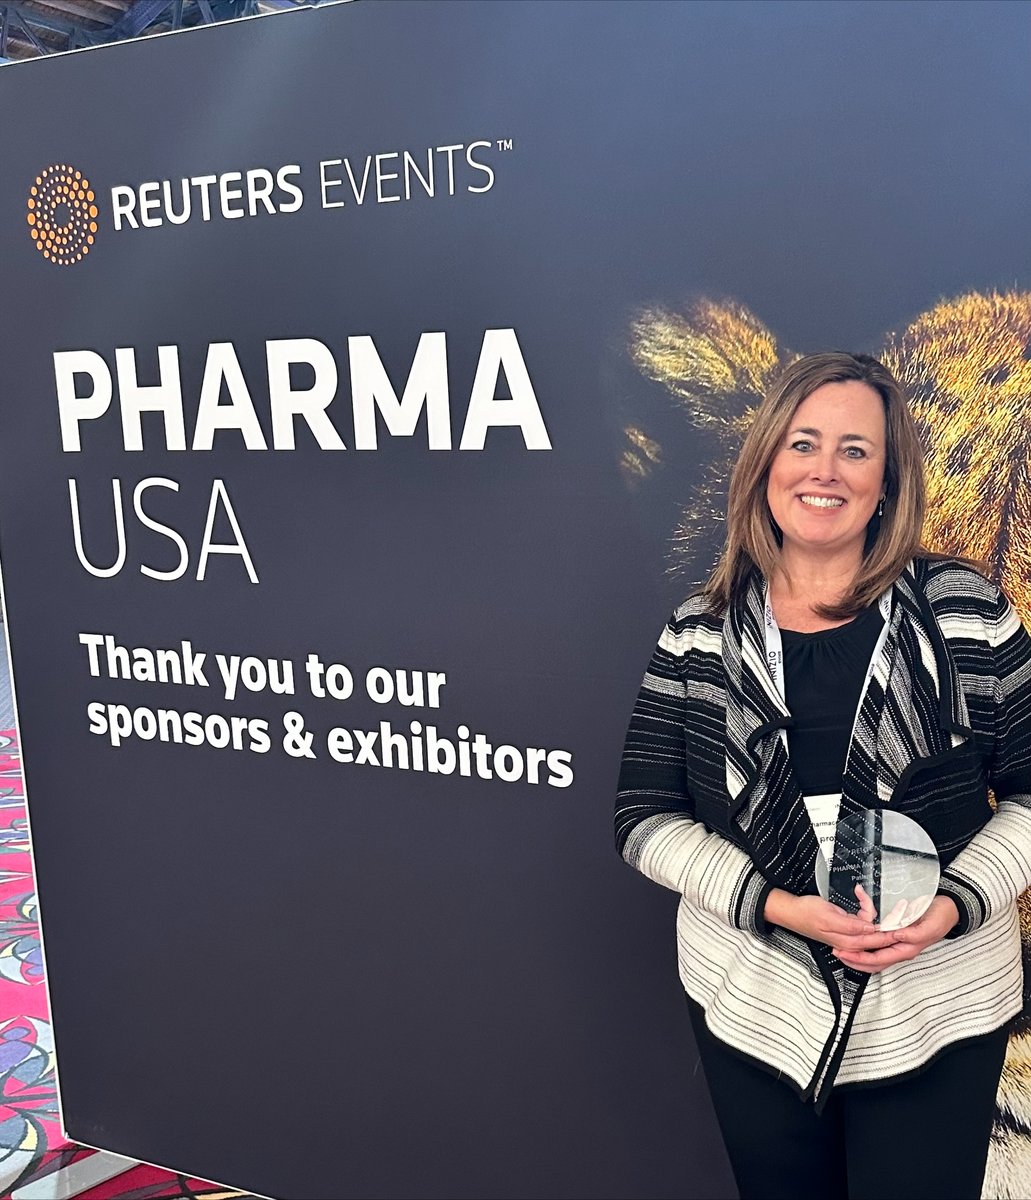 Proud to share that for the second year in a row our Patient Office has been selected as the Patient Champion of the Year by @REpharmaUSA. This recognition highlights the work our Patient Engagement and Advocacy Lead, Tara Brown, has done to put the patient first. #REPharmaUSA